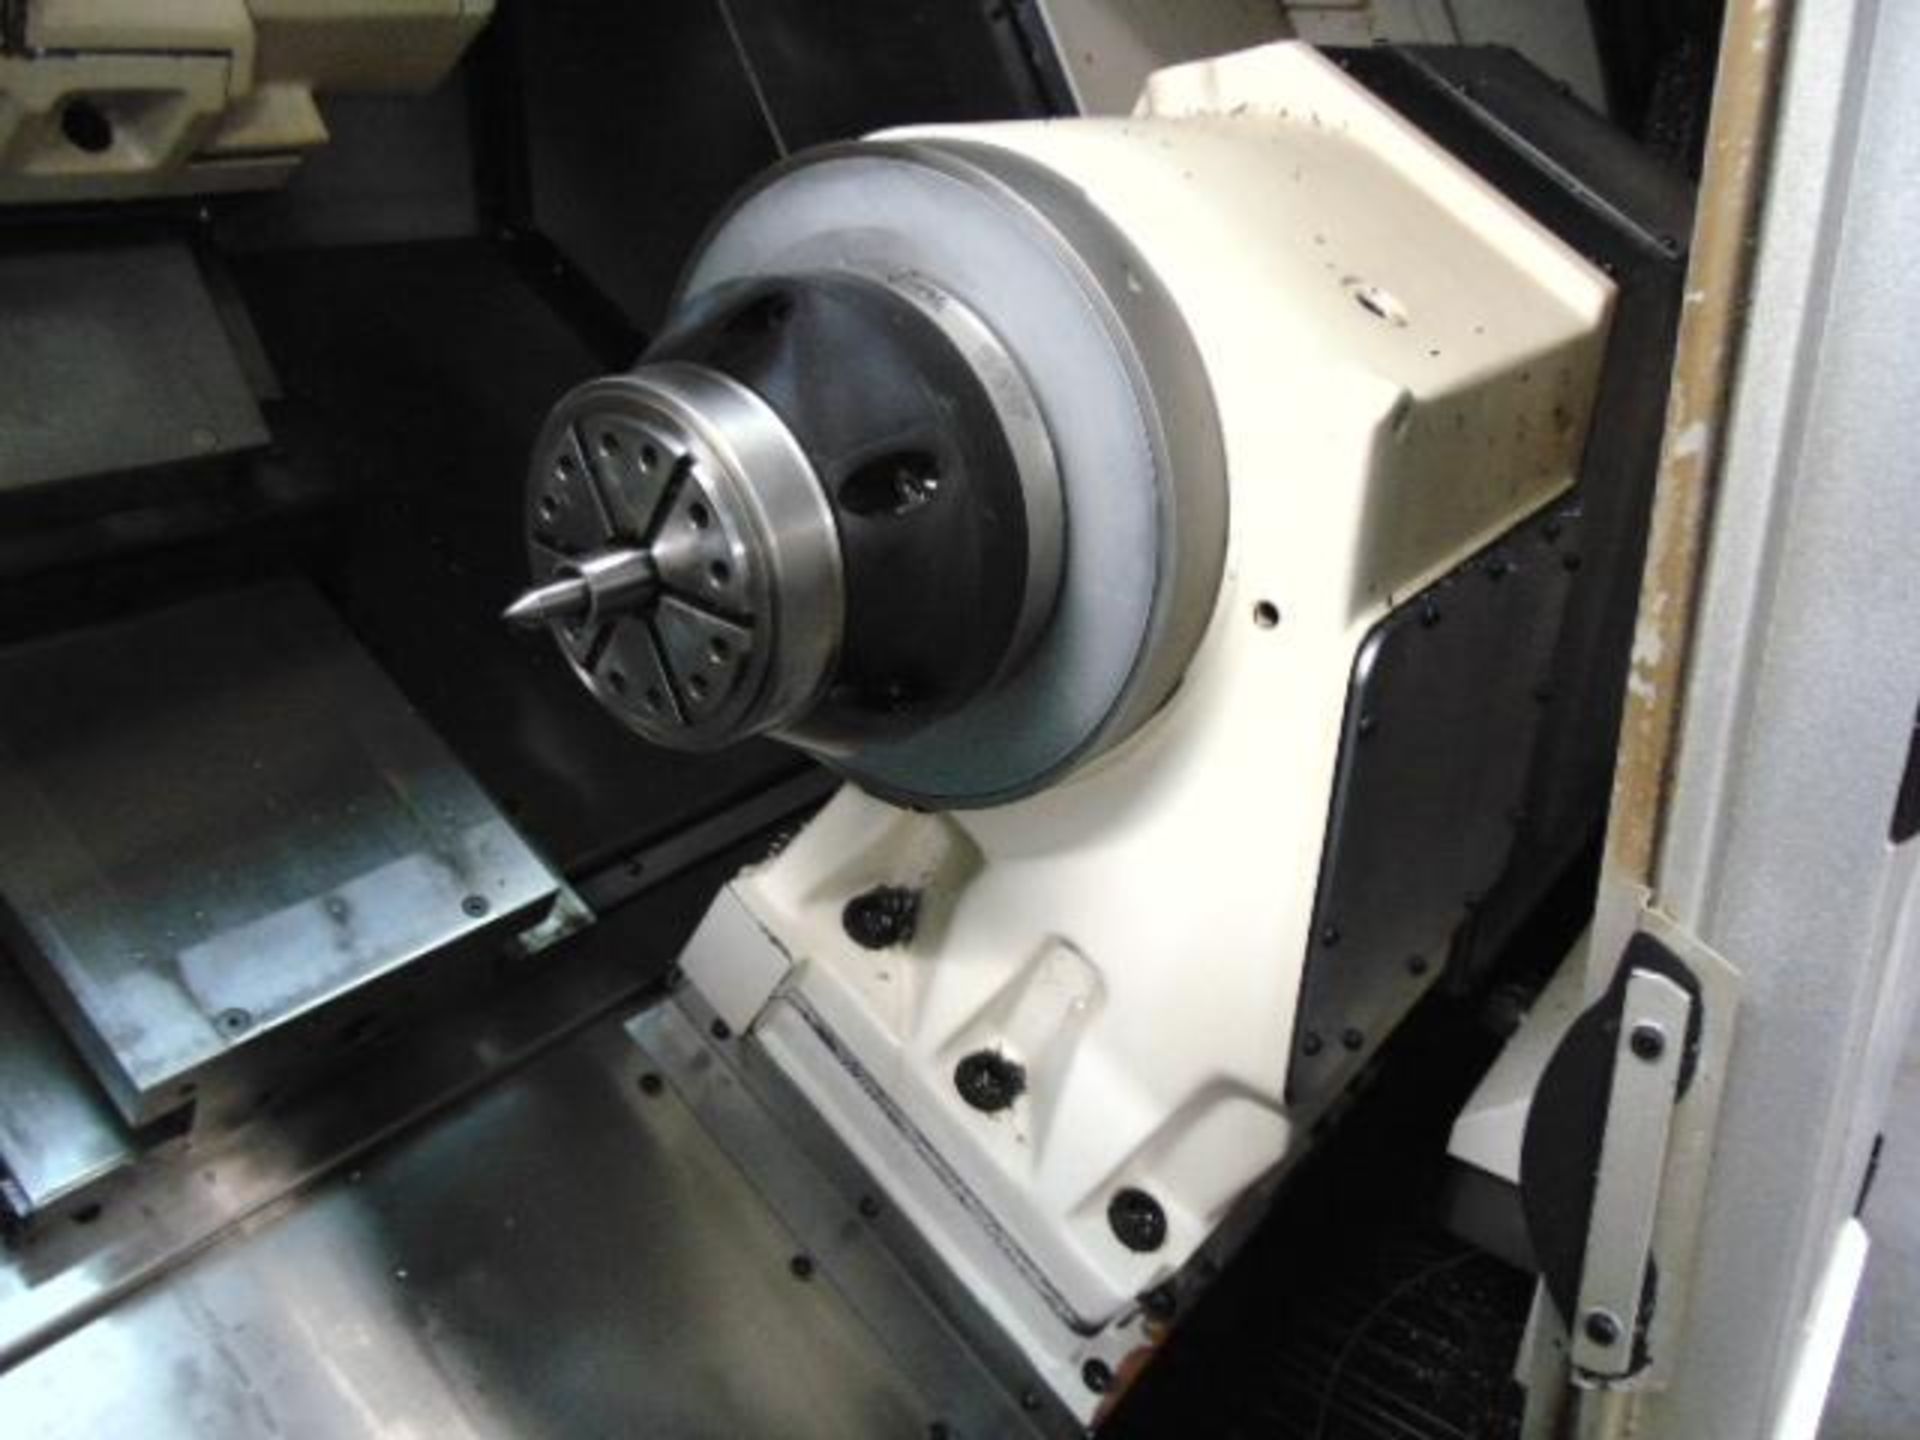 MULTI-AXIS CNC TURNING CENTER, OKUMA MDL. LB3000EXII-MYW 800 SPACE TURN, new 2015, 0SP-P300L CNC con - Image 6 of 24